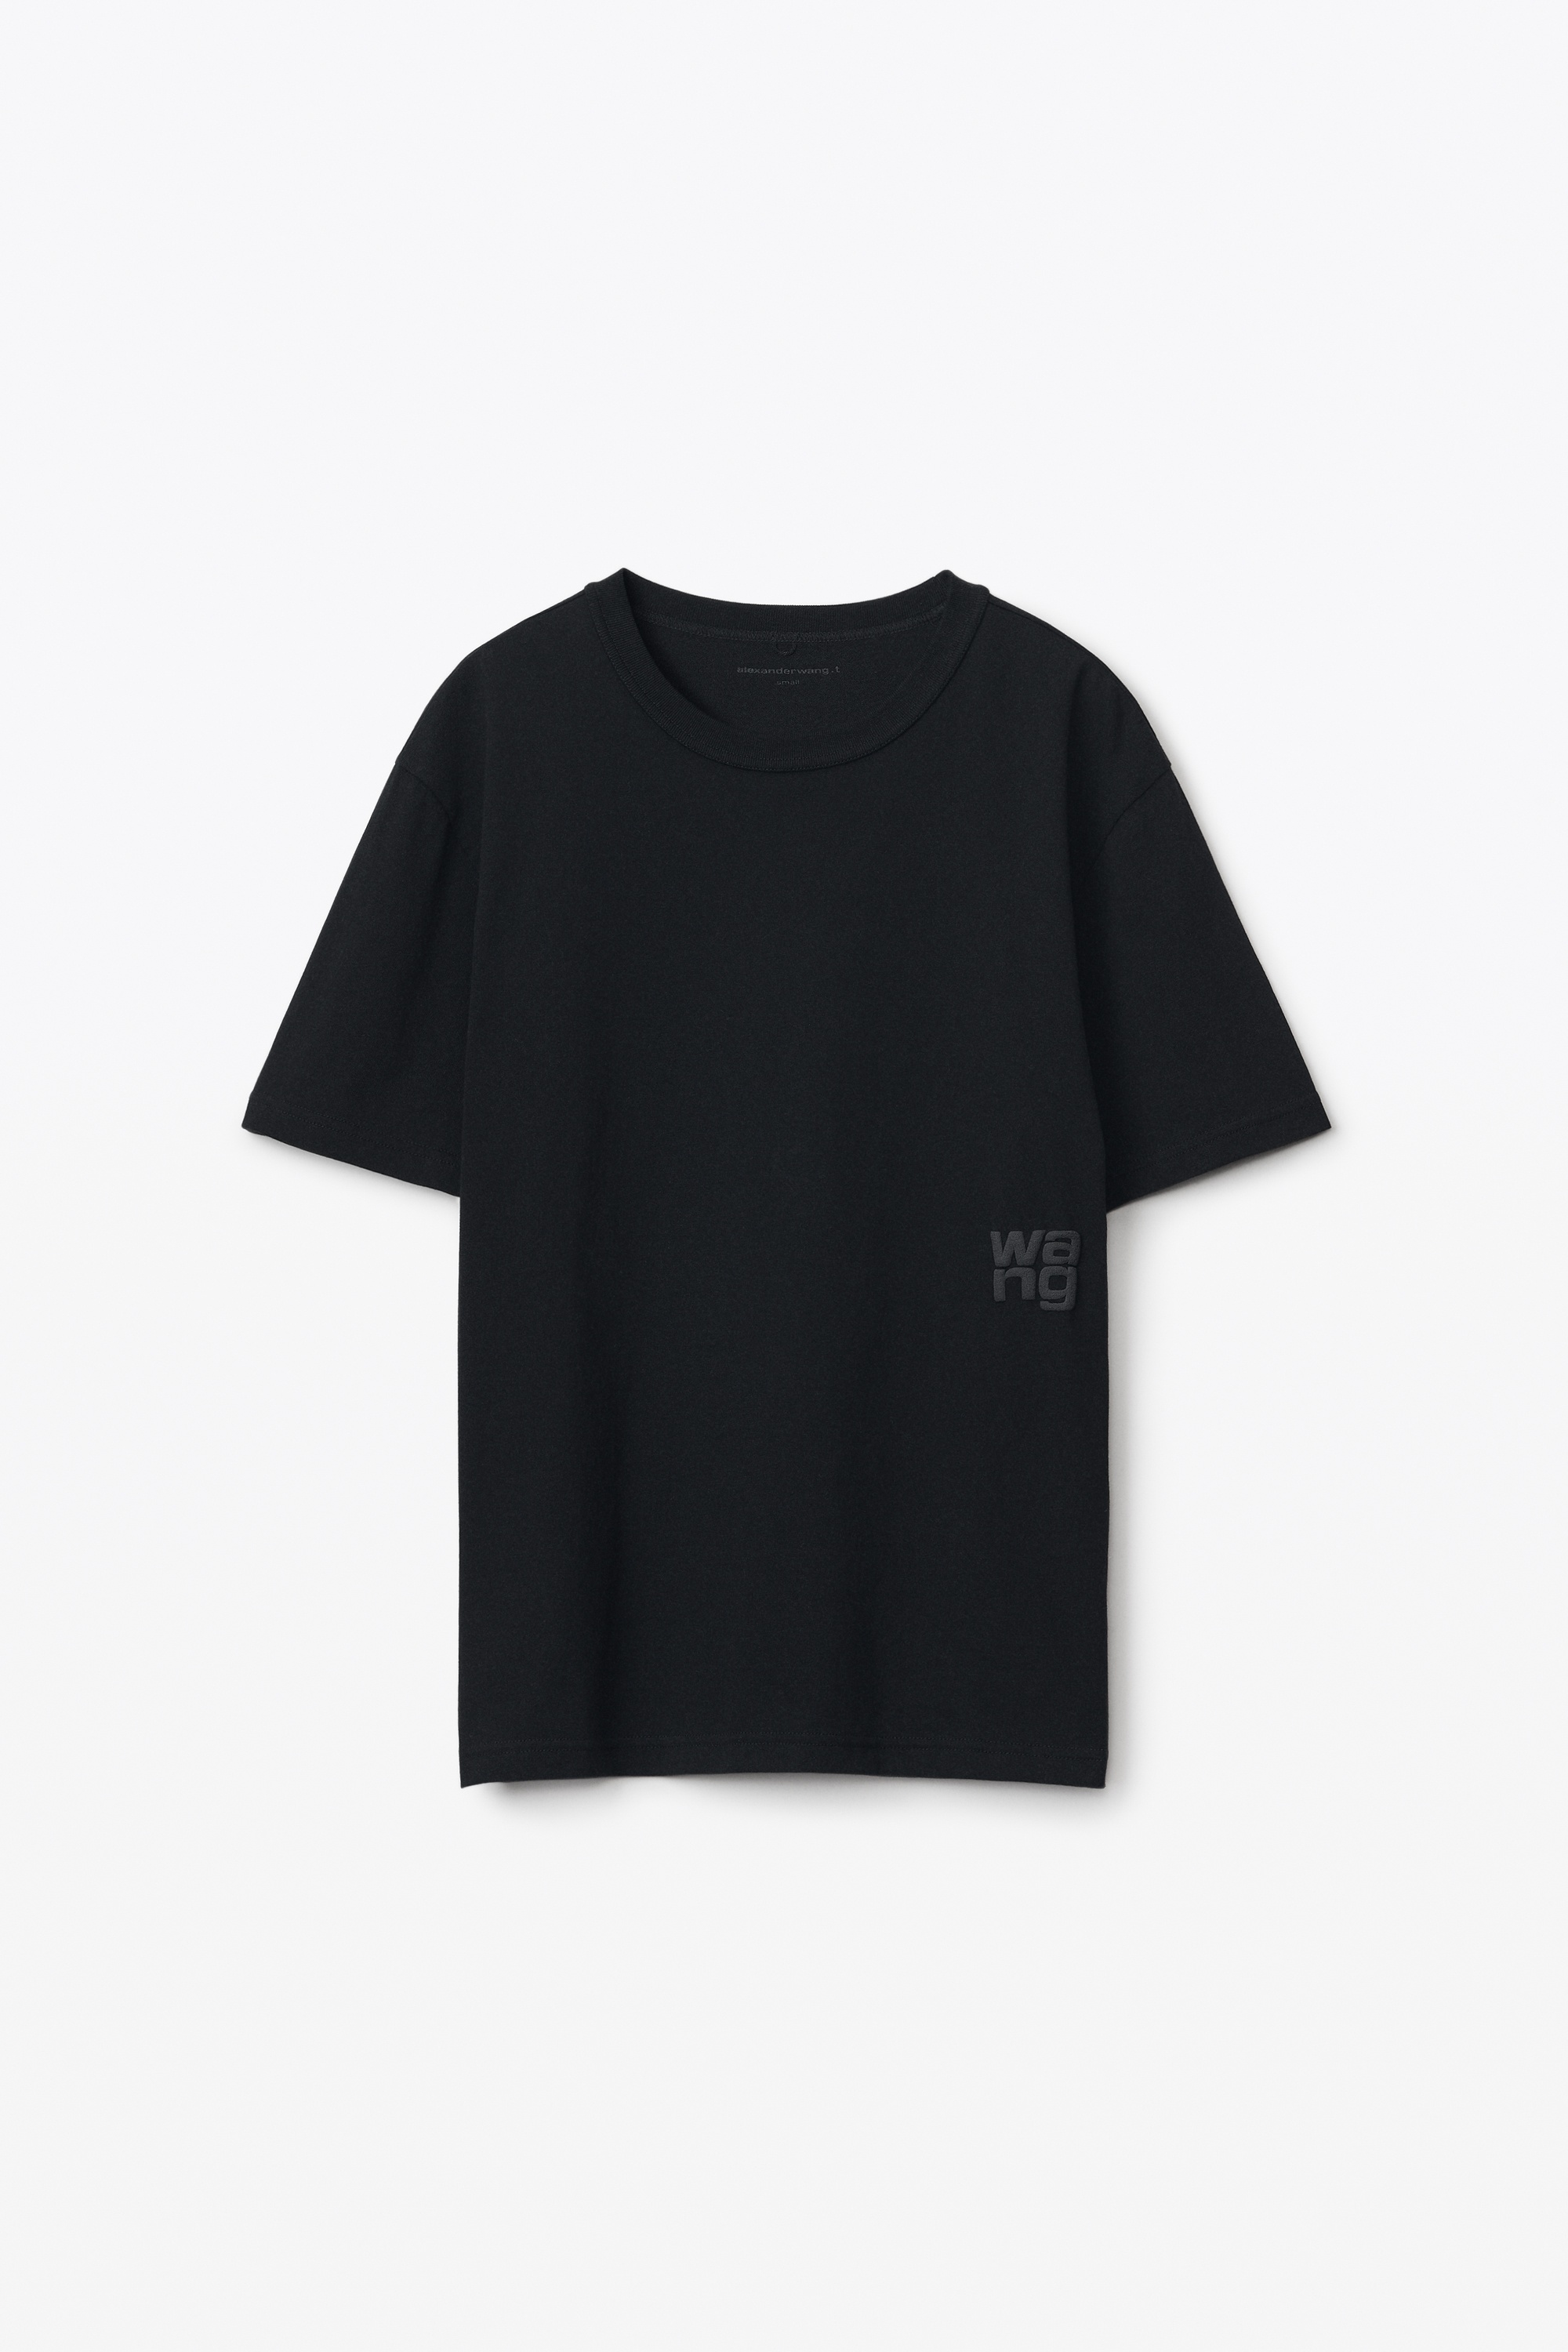 PUFF LOGO TEE IN COTTON JERSEY - 1